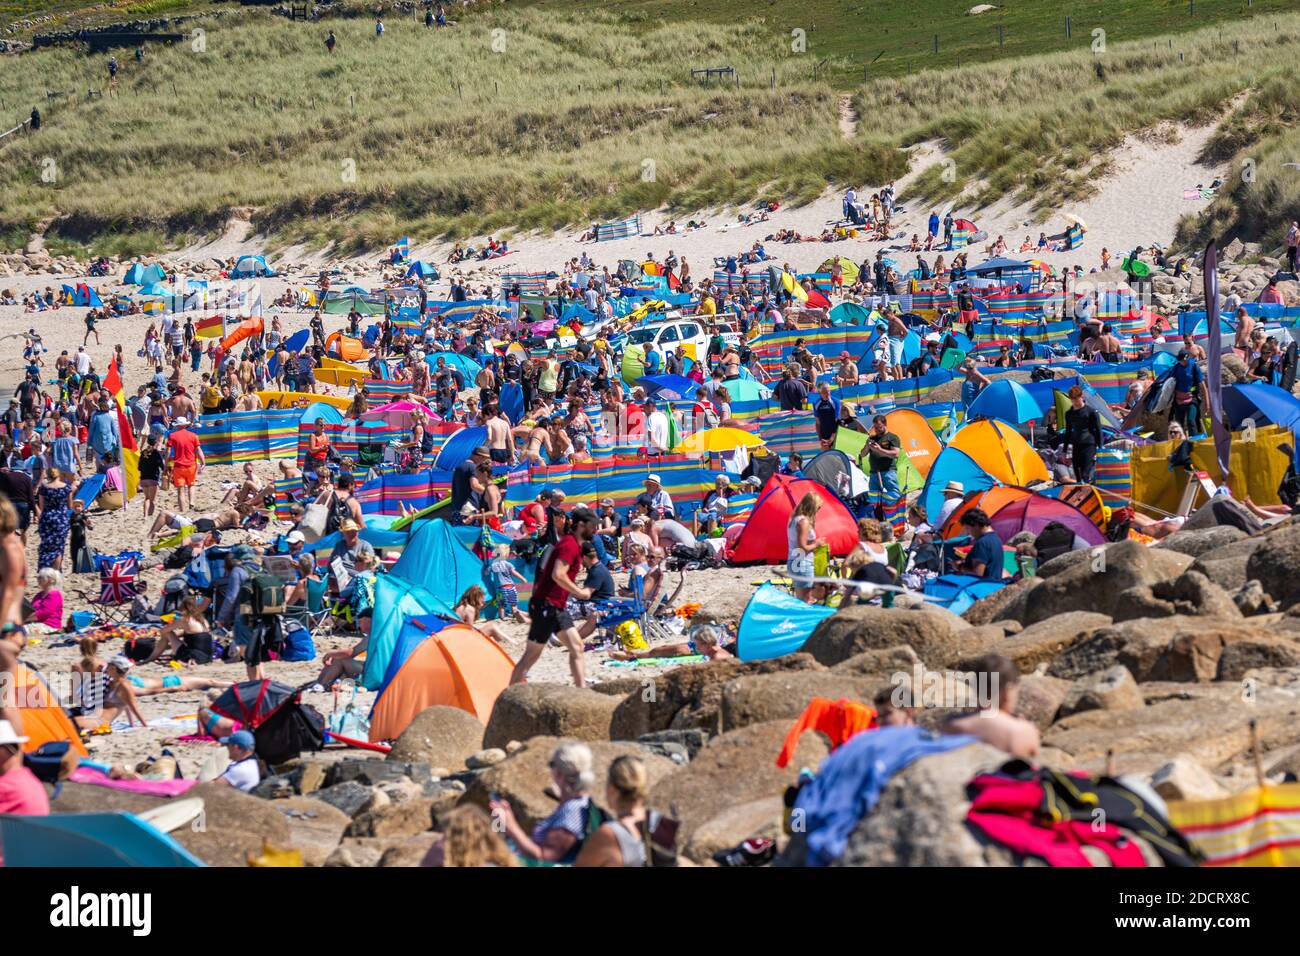 Over Crowded Sennen Cove Beach Summer 2020 Covid-19 No Social Distancing Stock Photo